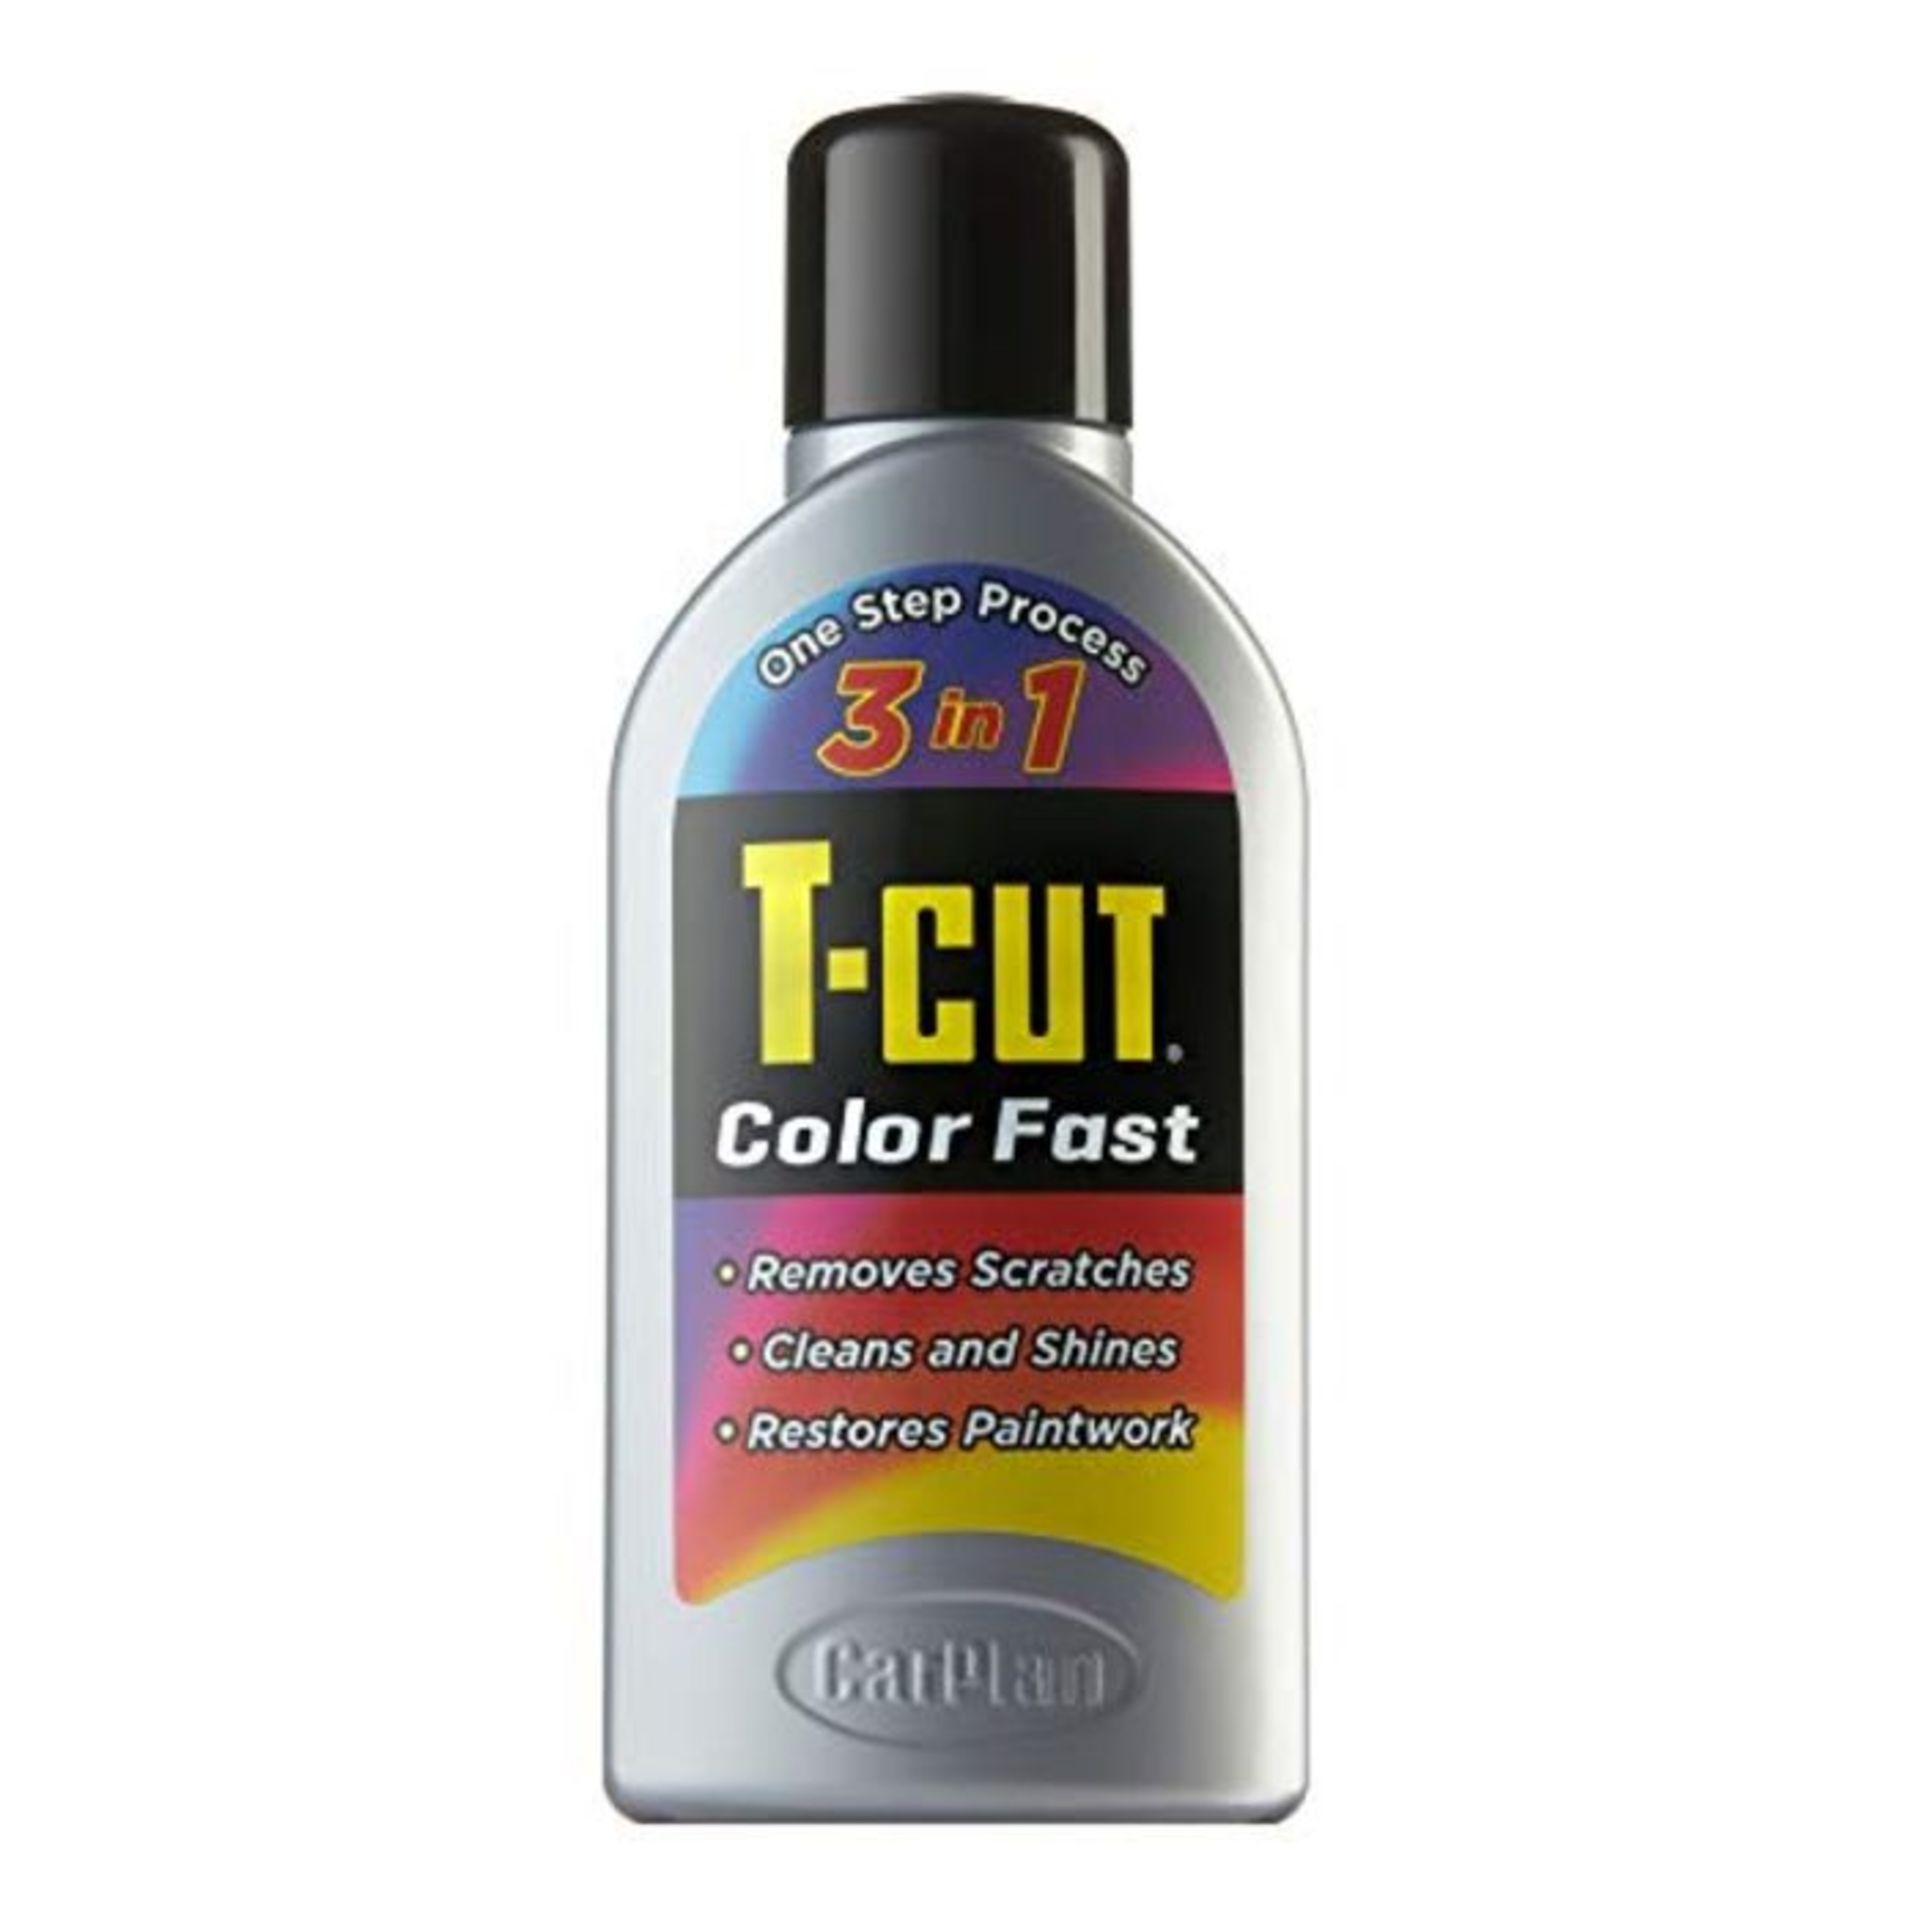 T-Cut Silver Scratch Remover Color Fast Paintwork Restorer Car Polish - 500ml * 13 Col